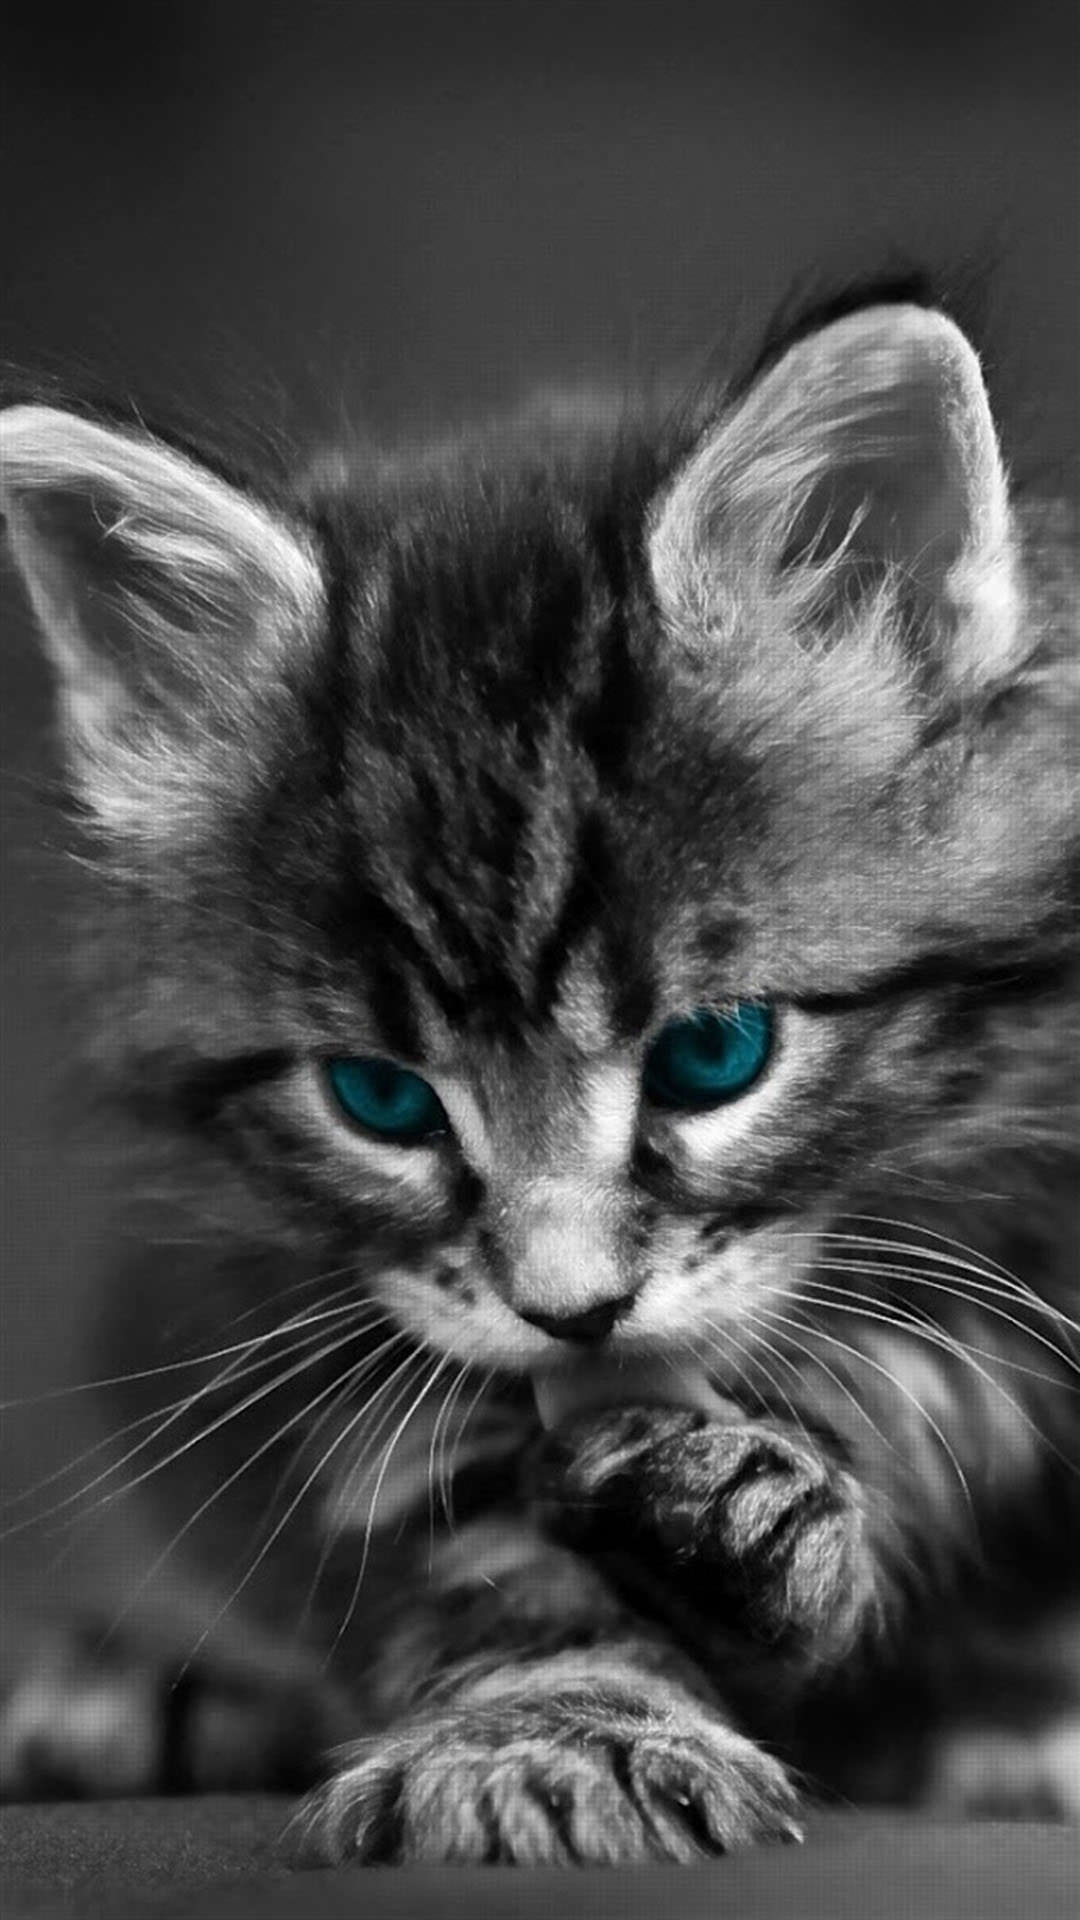 Wallpaper Kucing Hd Android Image Num 3